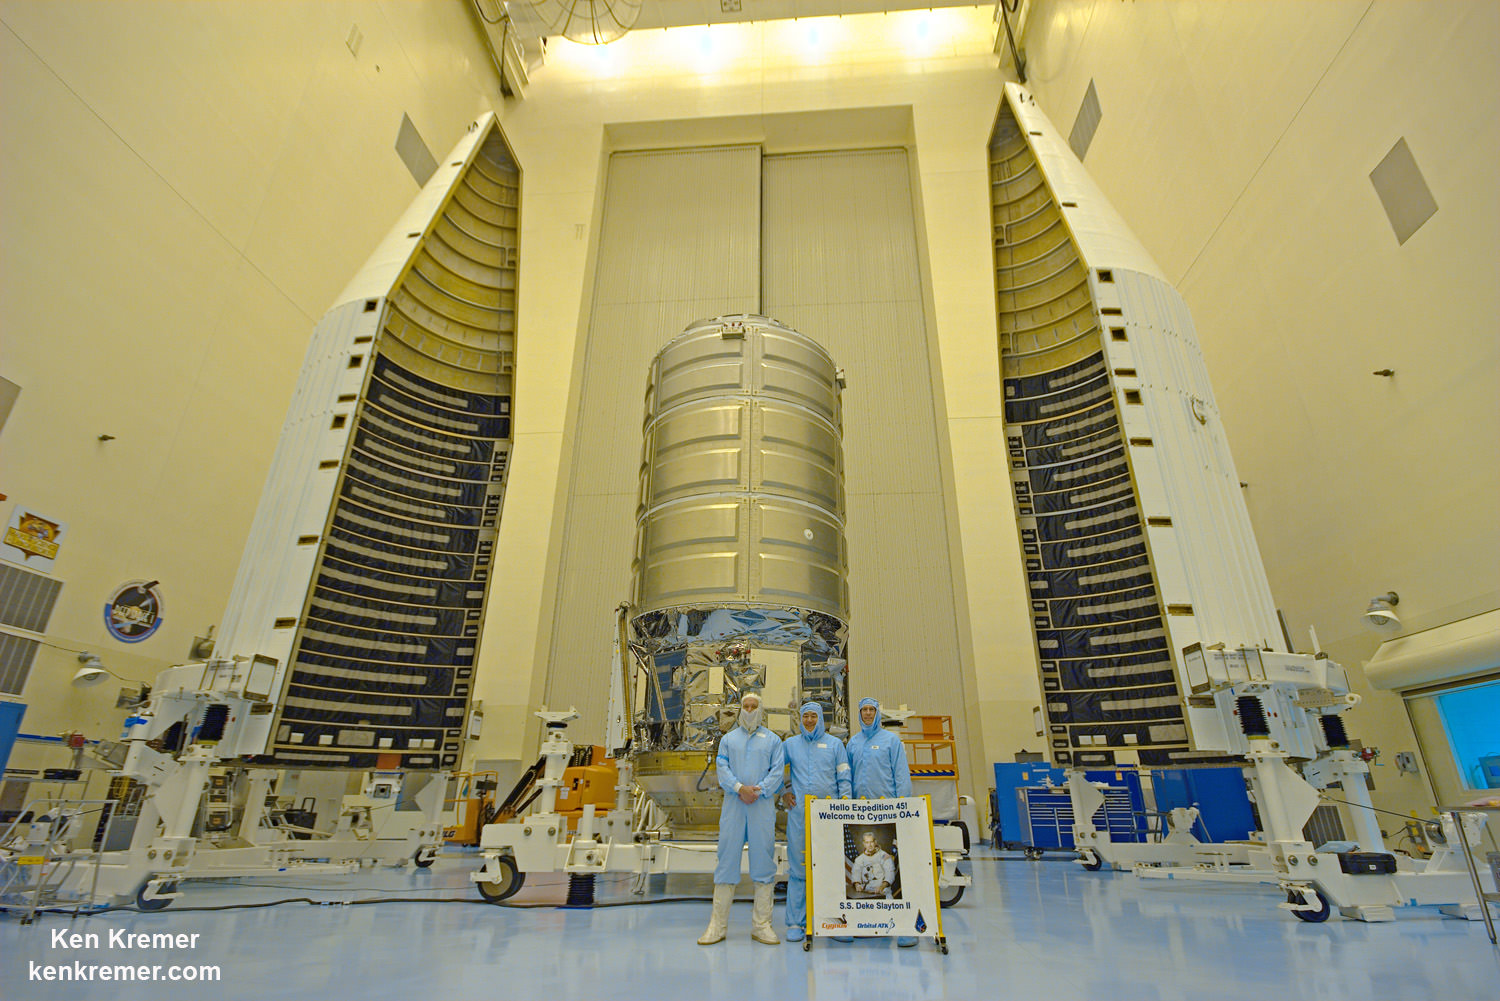 Inside the Payload Hazardous Servicing Facility high bay clean room at NASA's Kennedy Space Center in Florida, where the Orbital ATK Cygnus pressurized module is being processed for Dec. 3, 2015 launch, Dan Tani, former astronaut and now Orbital ATK VP for Mission and Cargo Operations, center, poses with Cygnus and mural of Deke Slayton, along with Randy Gordon, Launch Support Project manager for NASA, and Kevin Leslie, ULA Mission manager. Credit: Ken Kremer/kenkremer.com